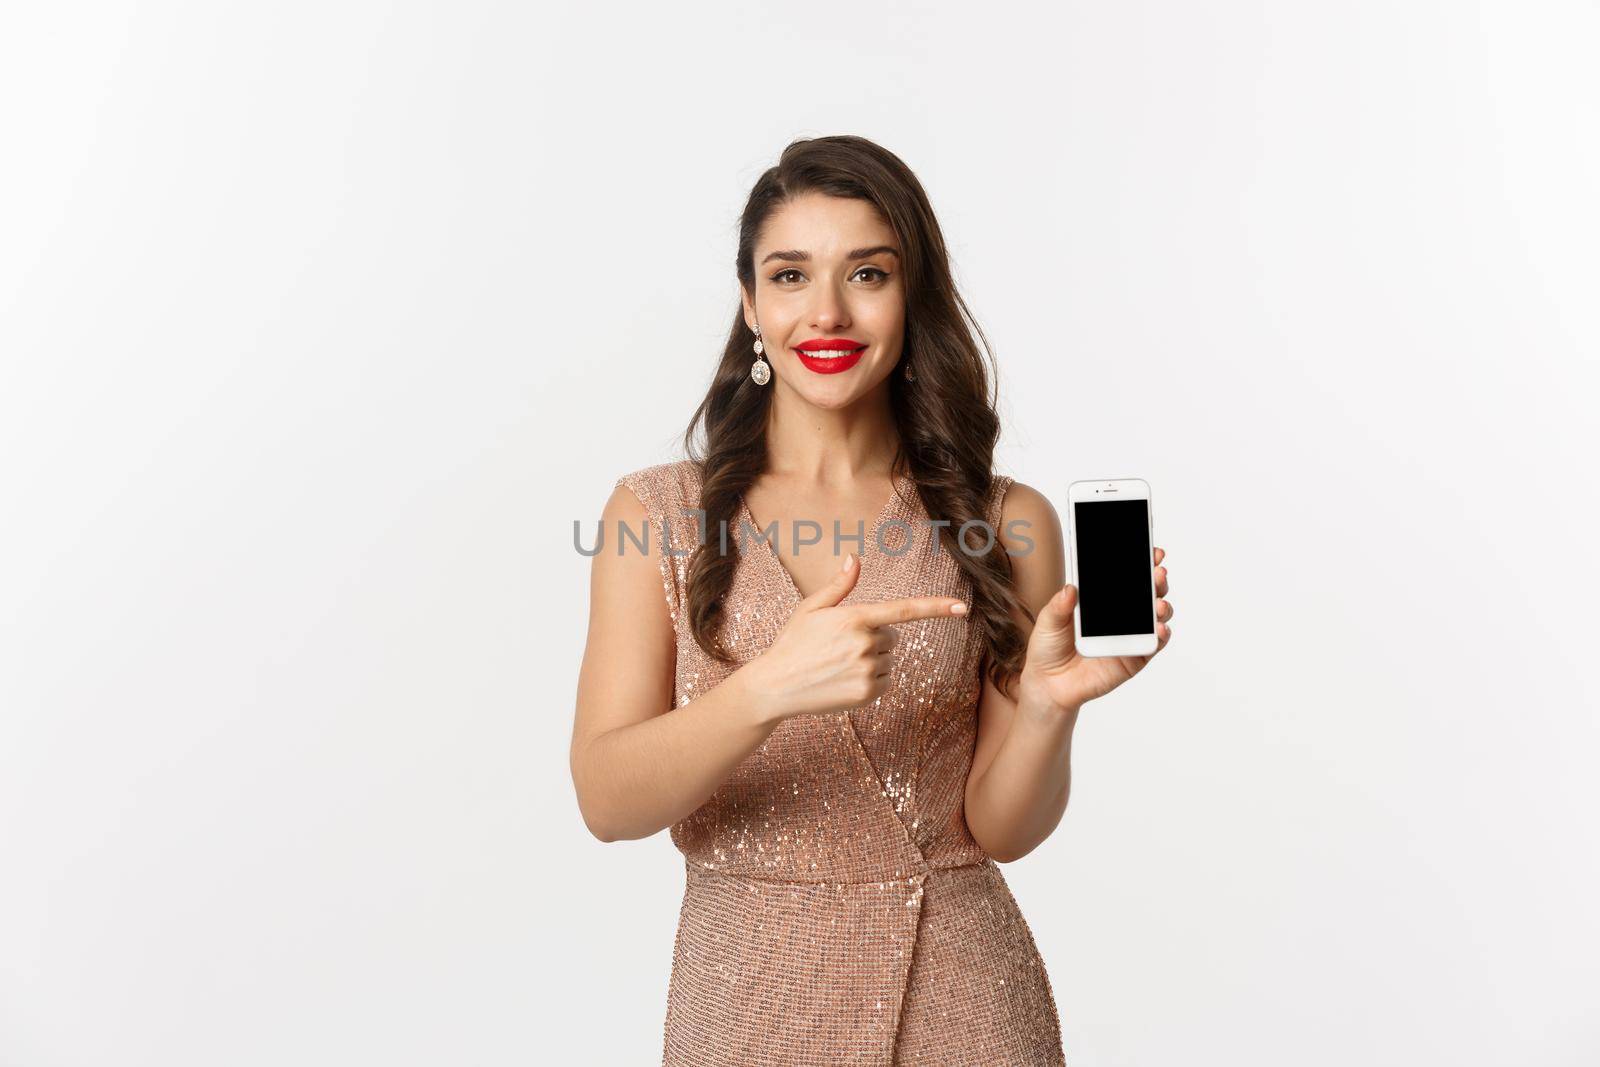 Online shopping. Good-looking woman with red lipstick, luxury dress, pointing finger at mobile screen, showing internet store or app, white background.